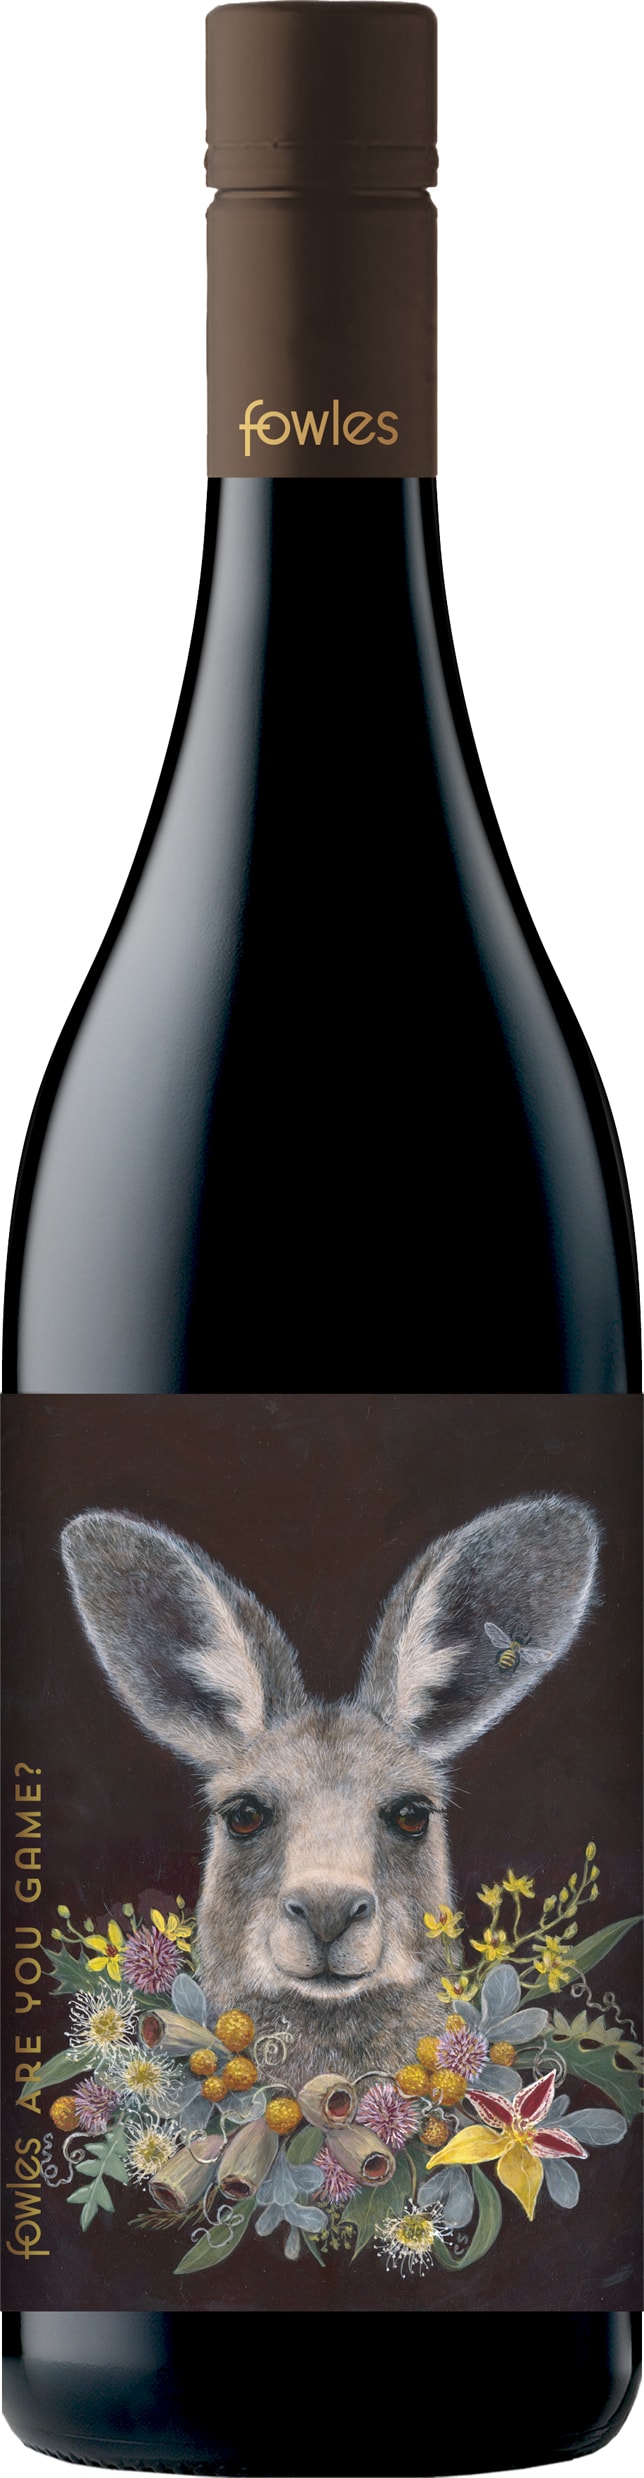 Fowles Wine Are You Game? Shiraz 2020 75cl - Buy Fowles Wine Wines from GREAT WINES DIRECT wine shop